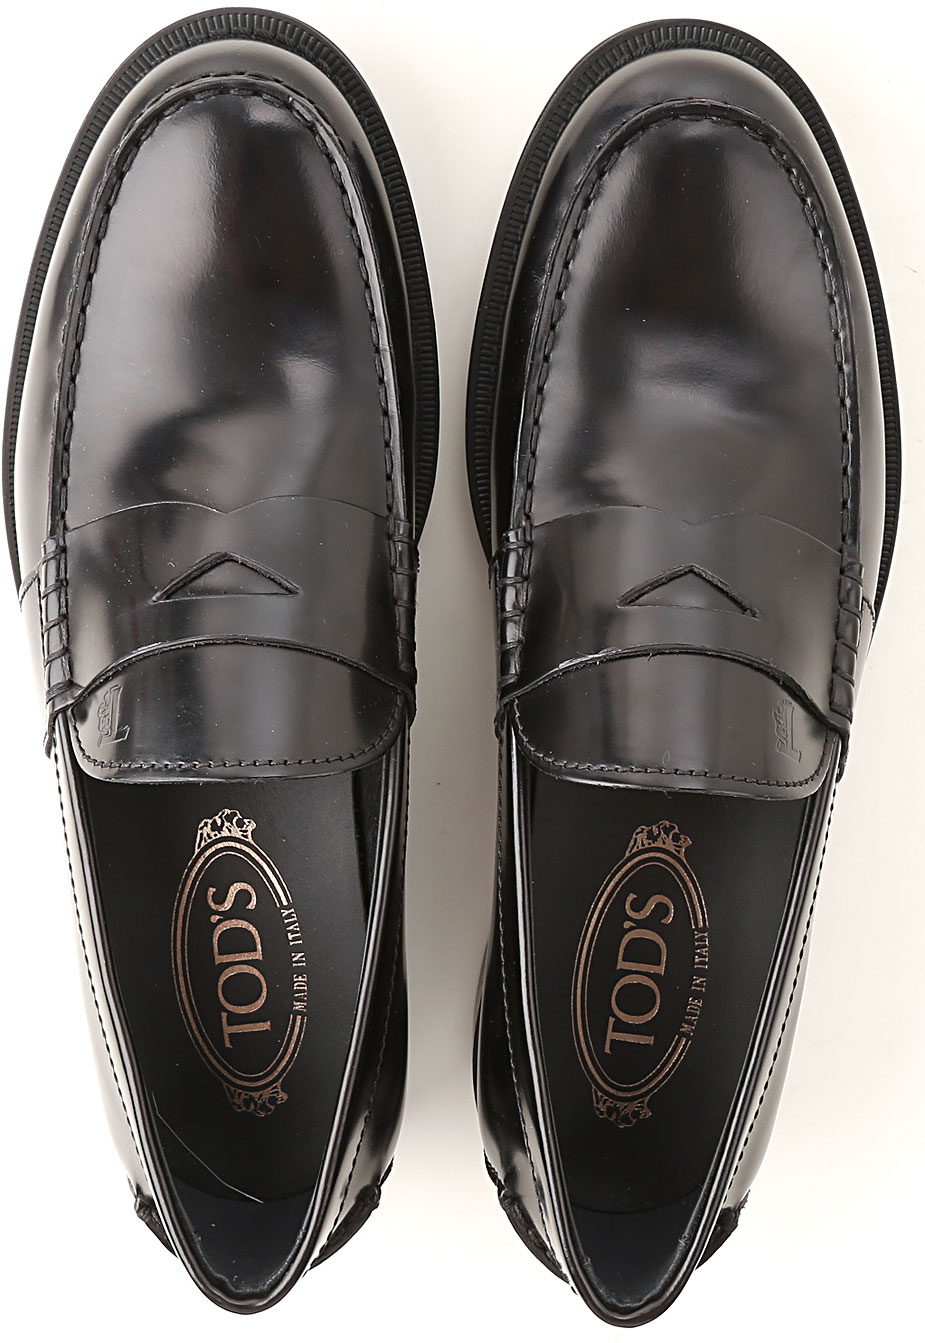 Mens Shoes Tods, Style code: xxm0ud0k130aktb999--